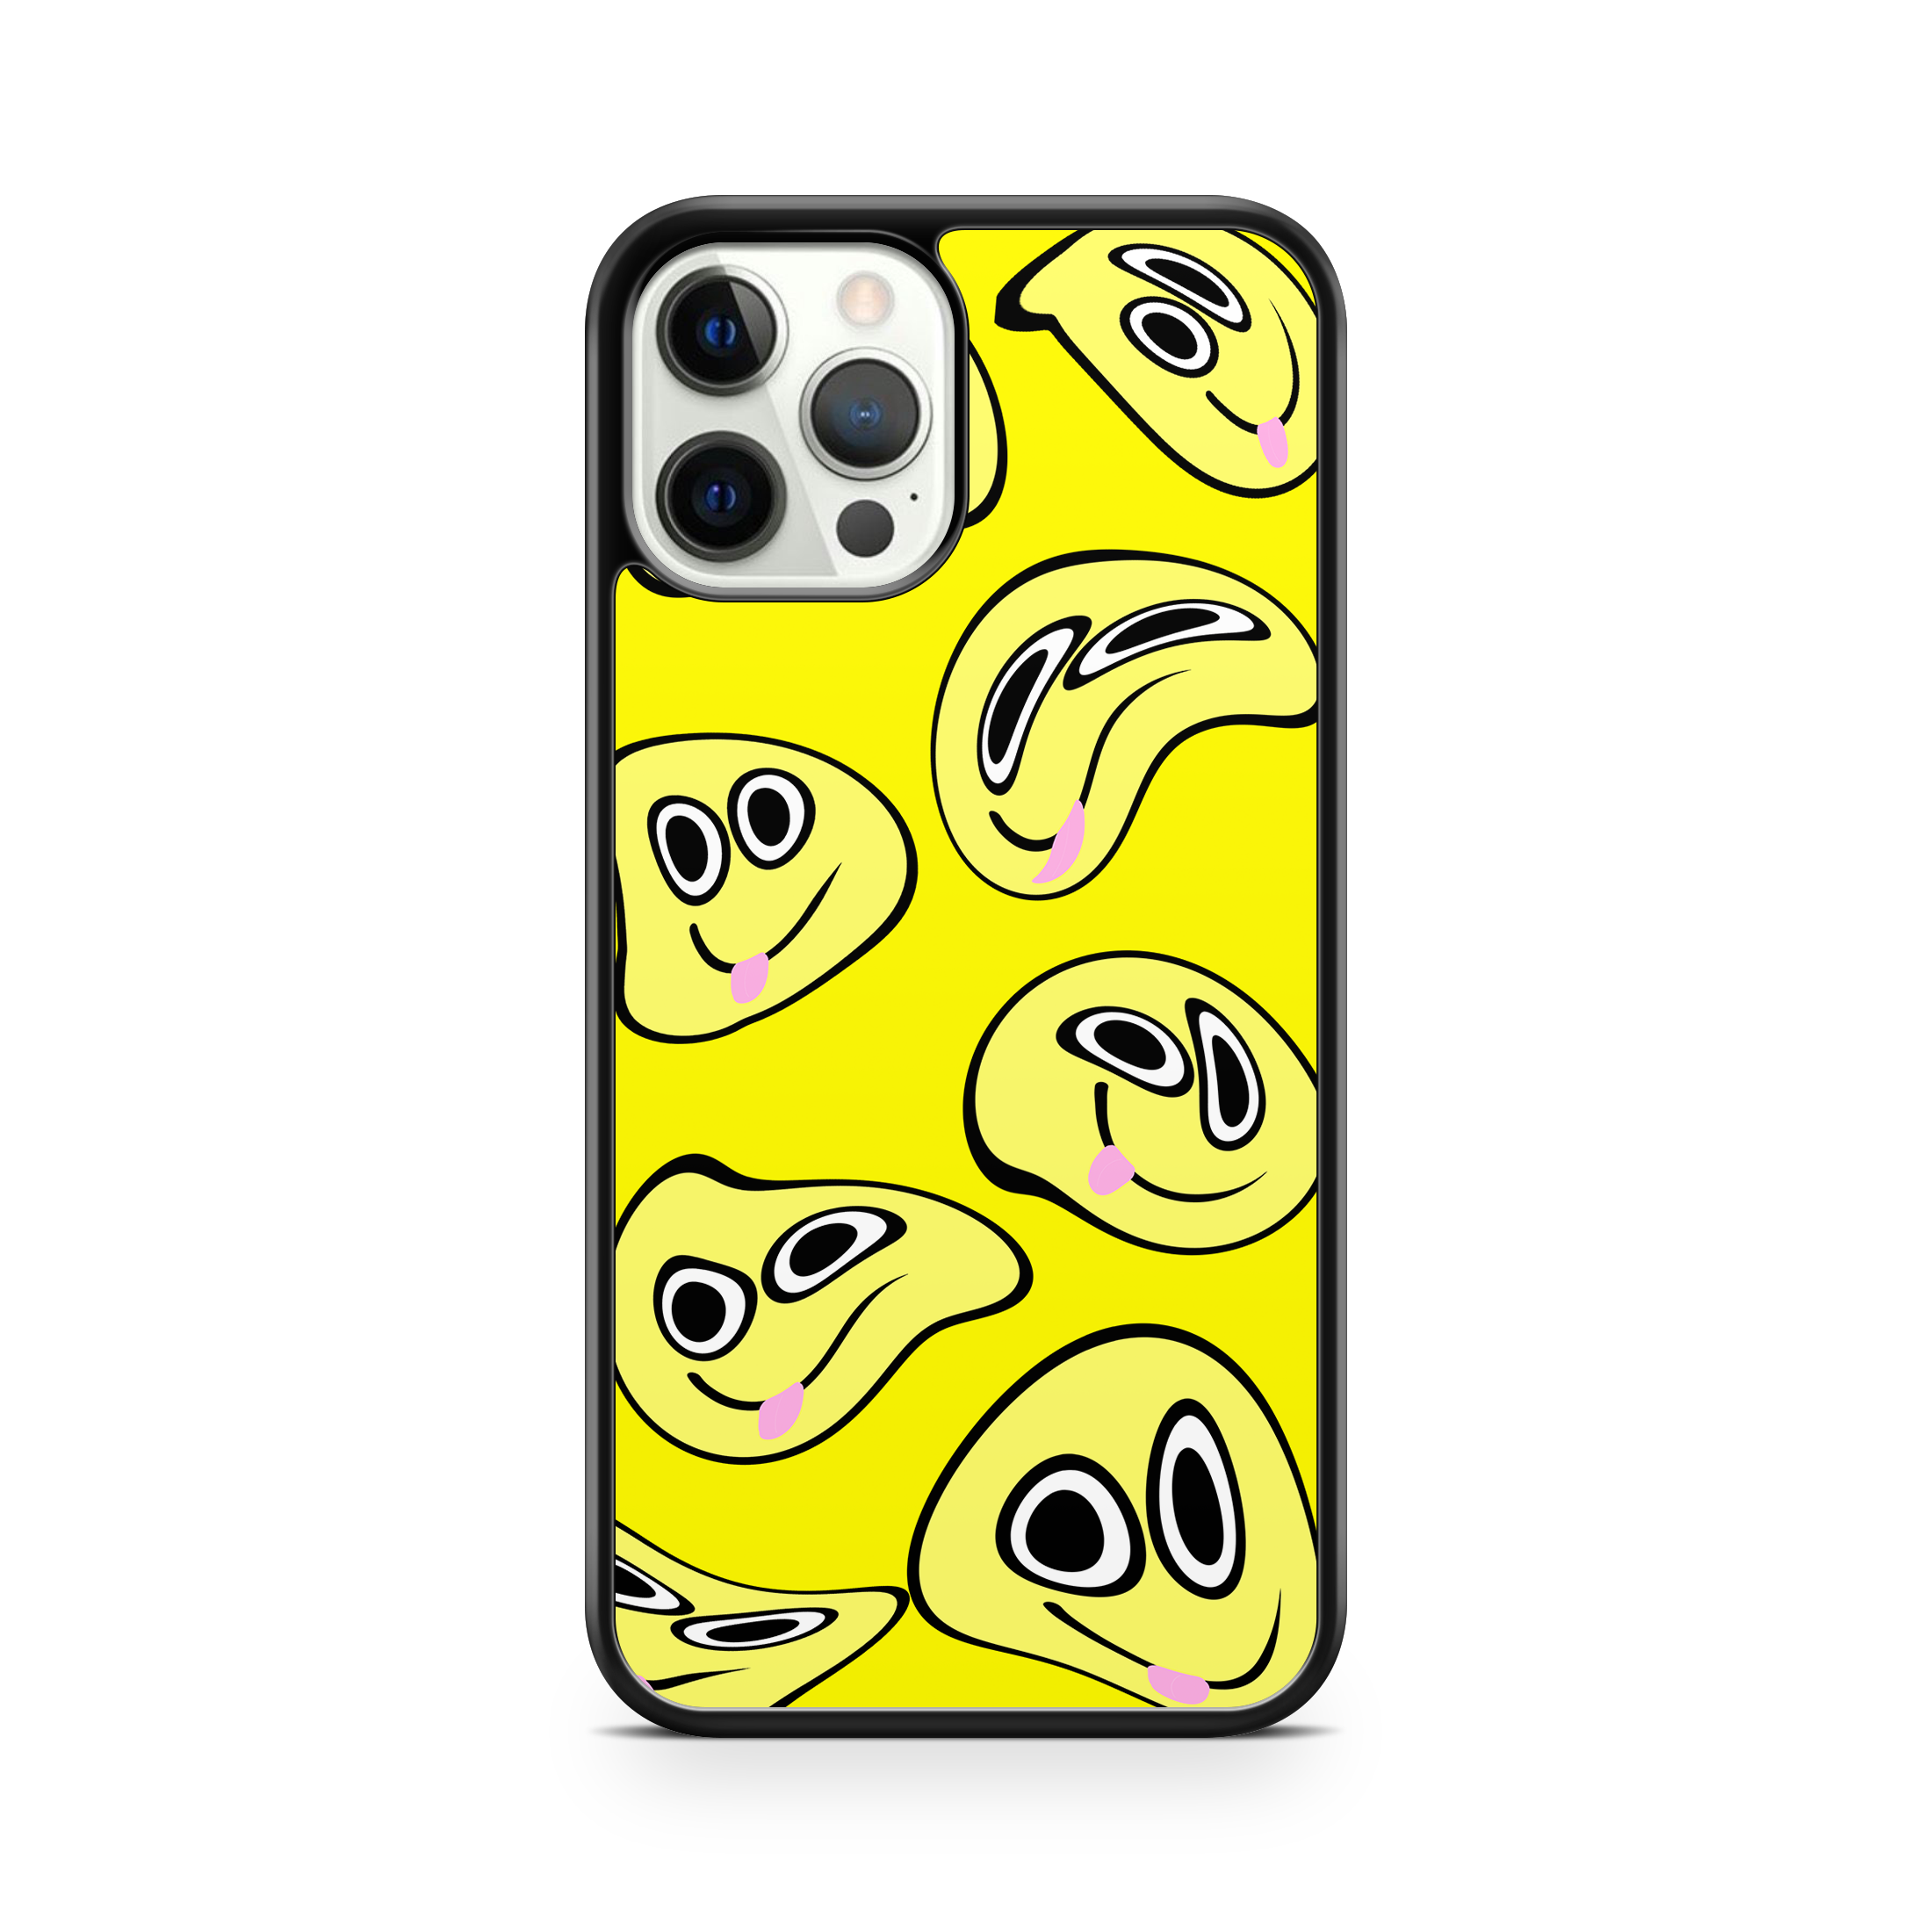 Smiley yellow faces iPhone case